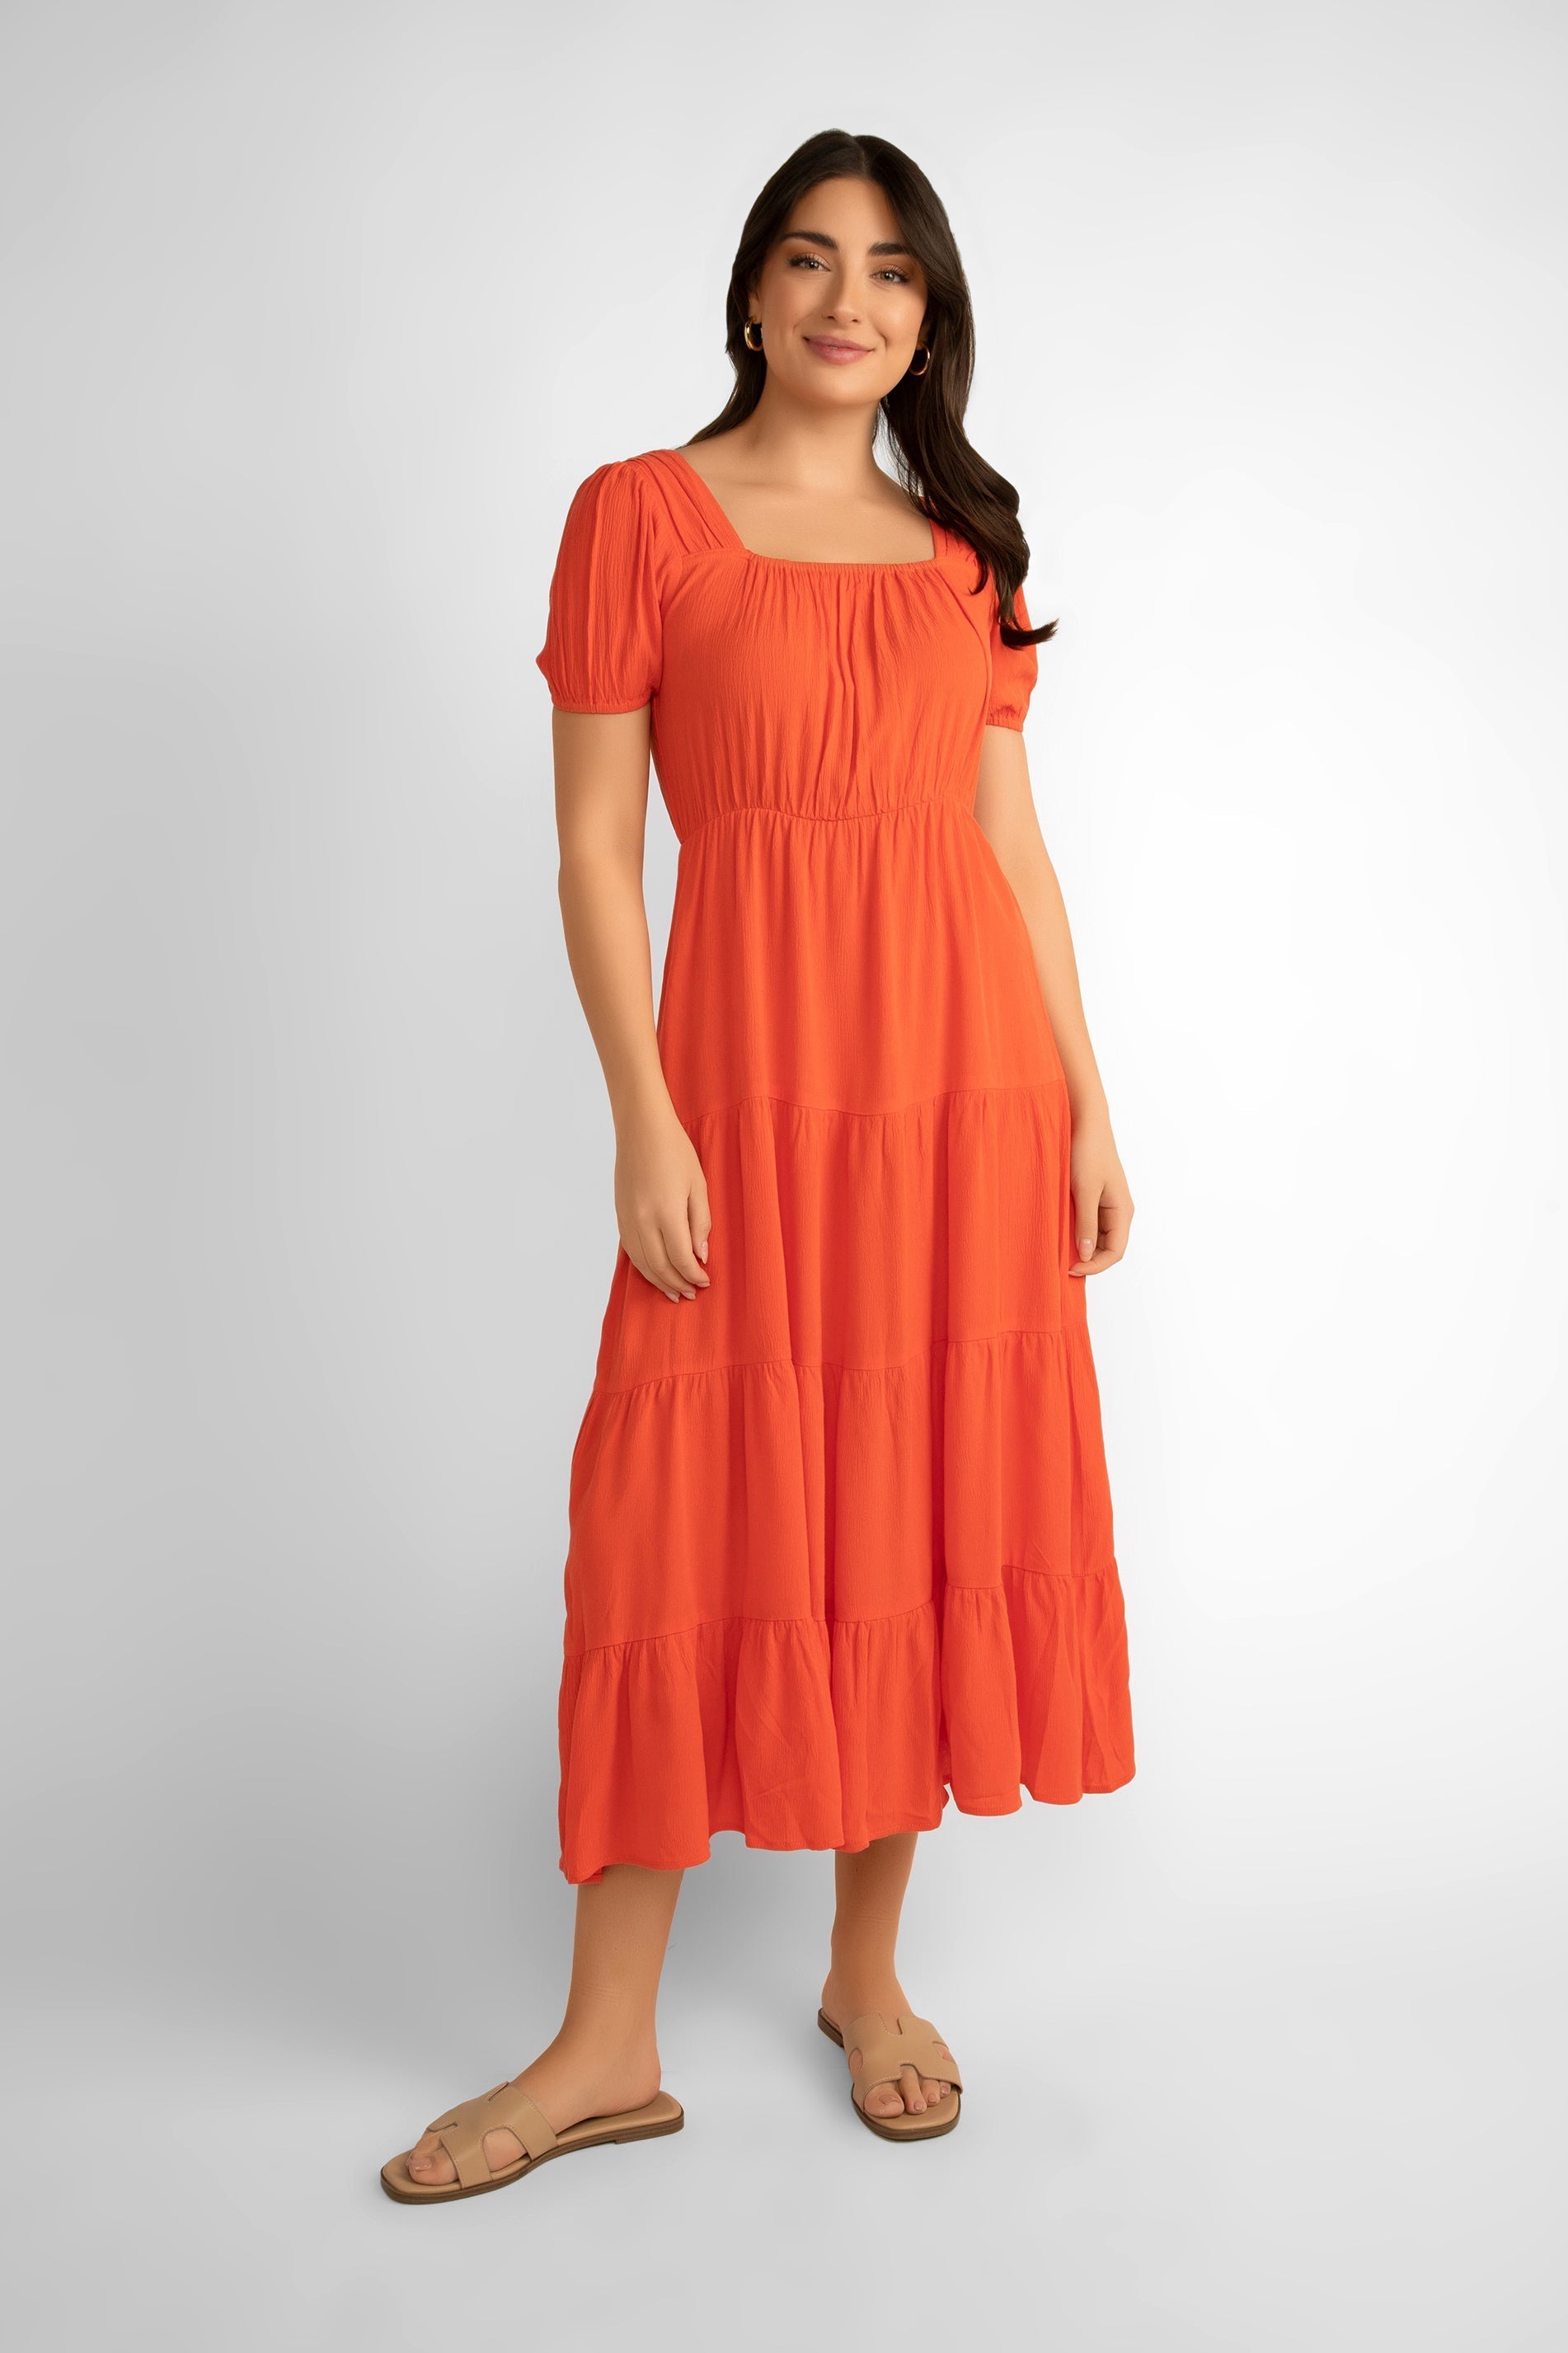 Pink Martini (DR-230524) Women's Square Neck, Short Puff Sleeve Tiered Midi Dress in Orange